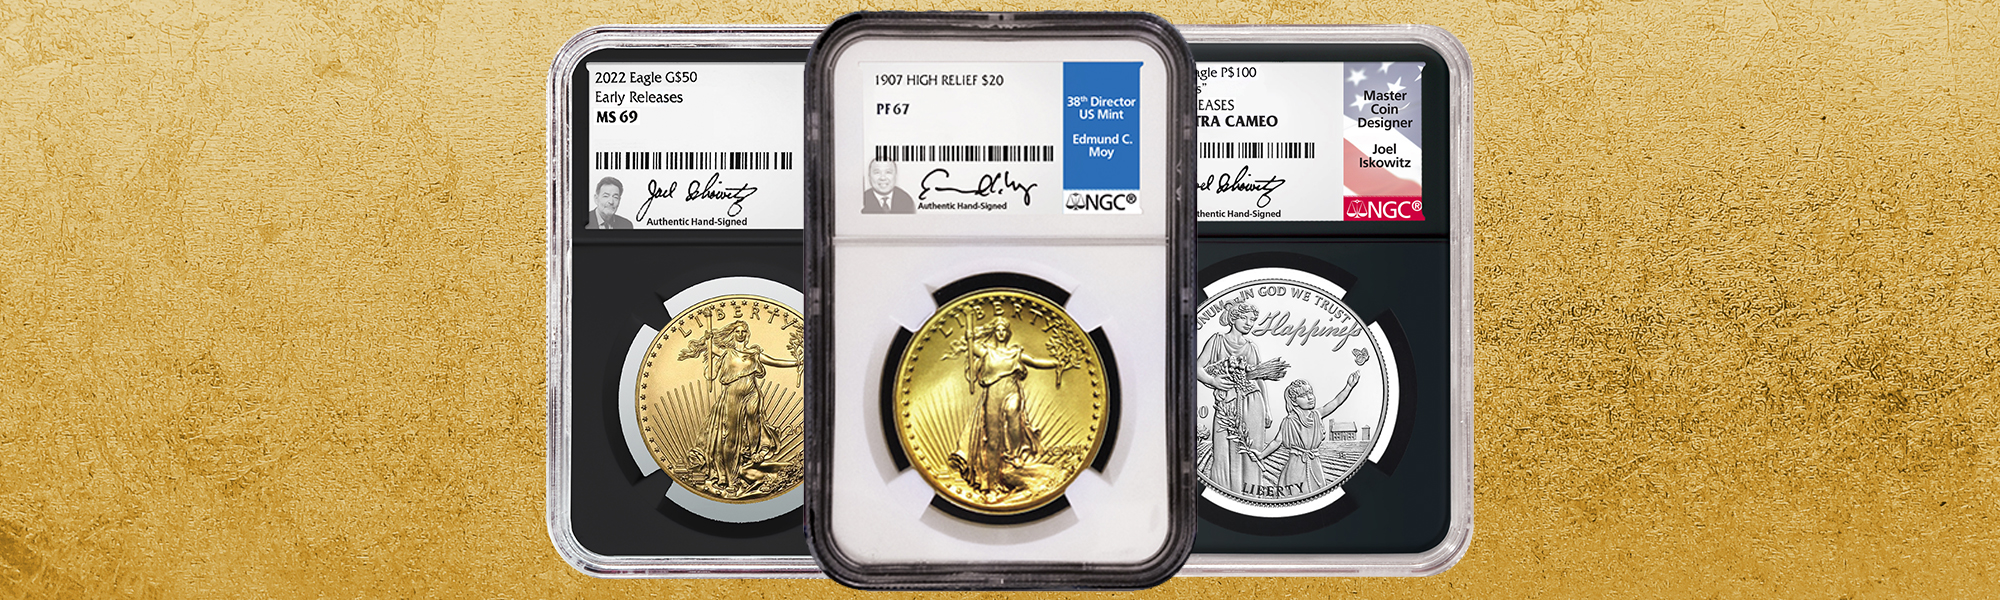 Signature Coins & Bullion reviews ratings and company details